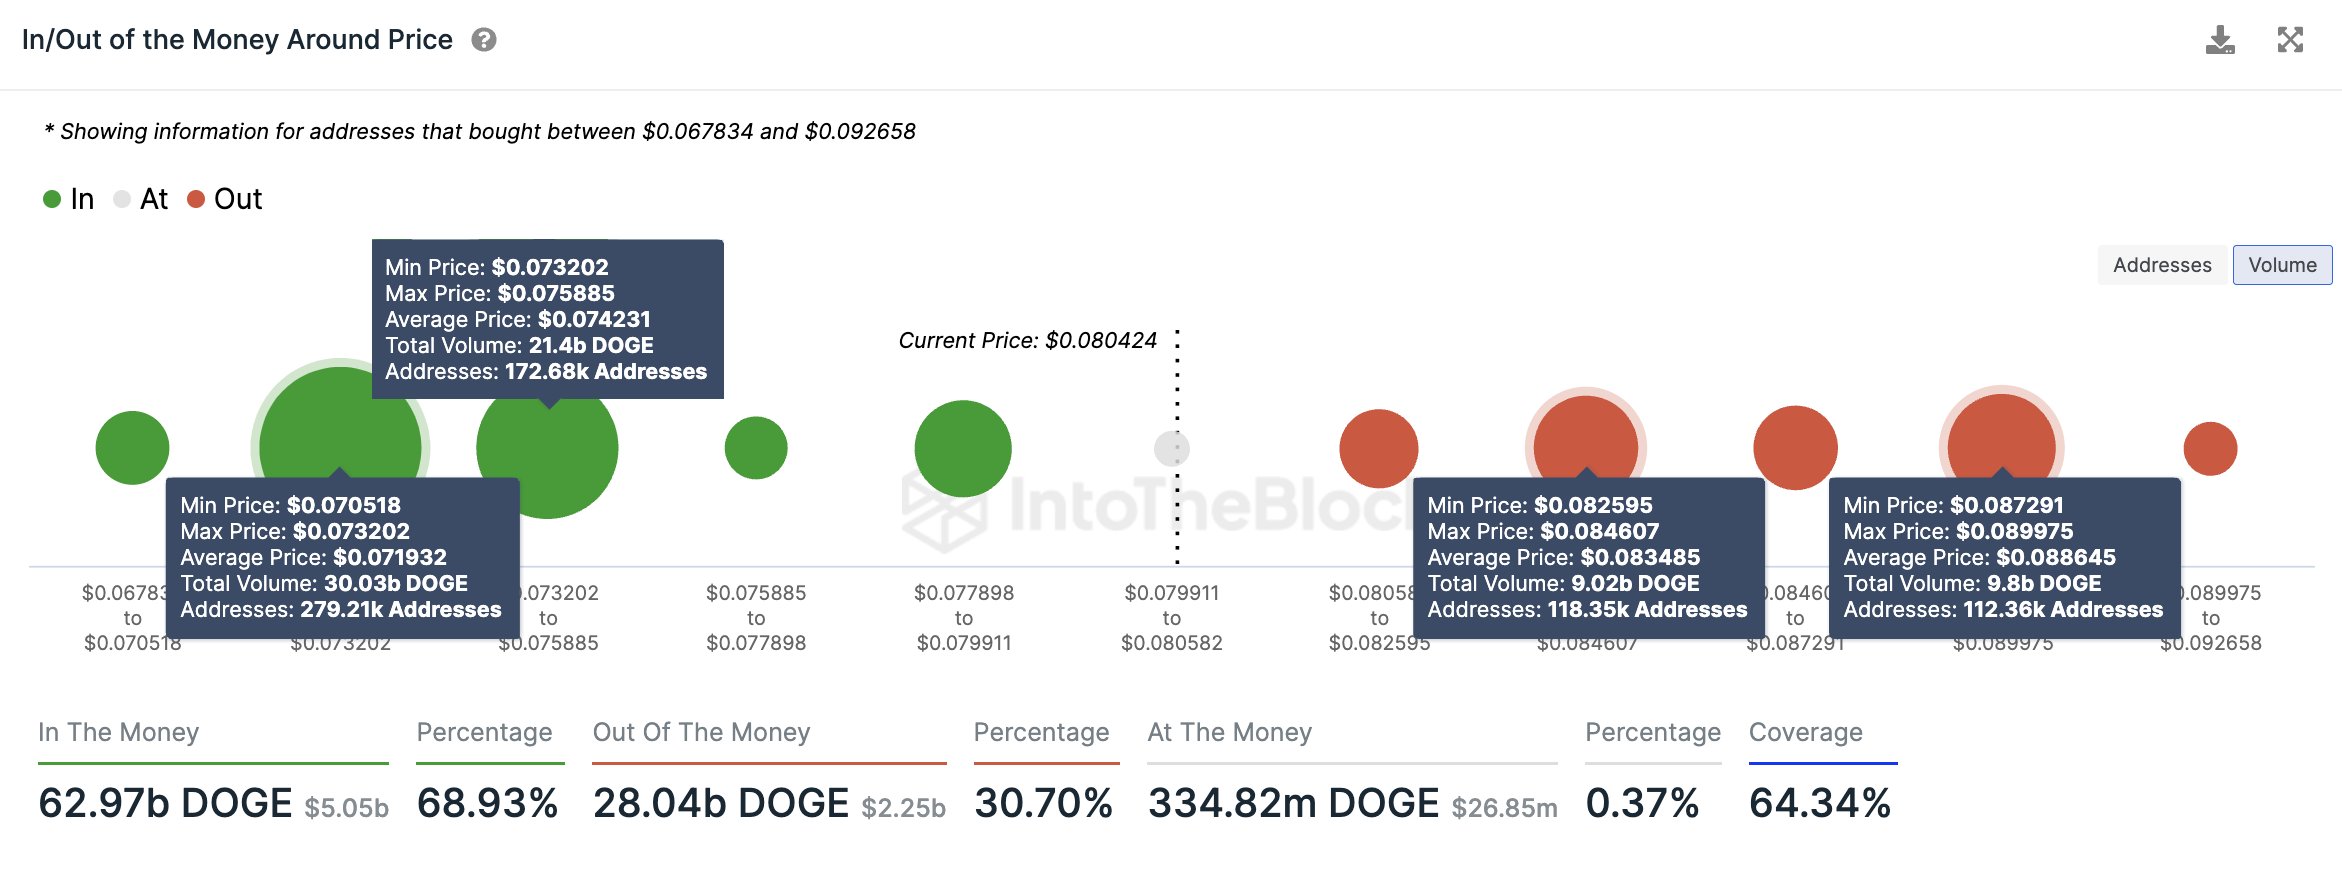  doge dogecoin price movements combination watch investors 